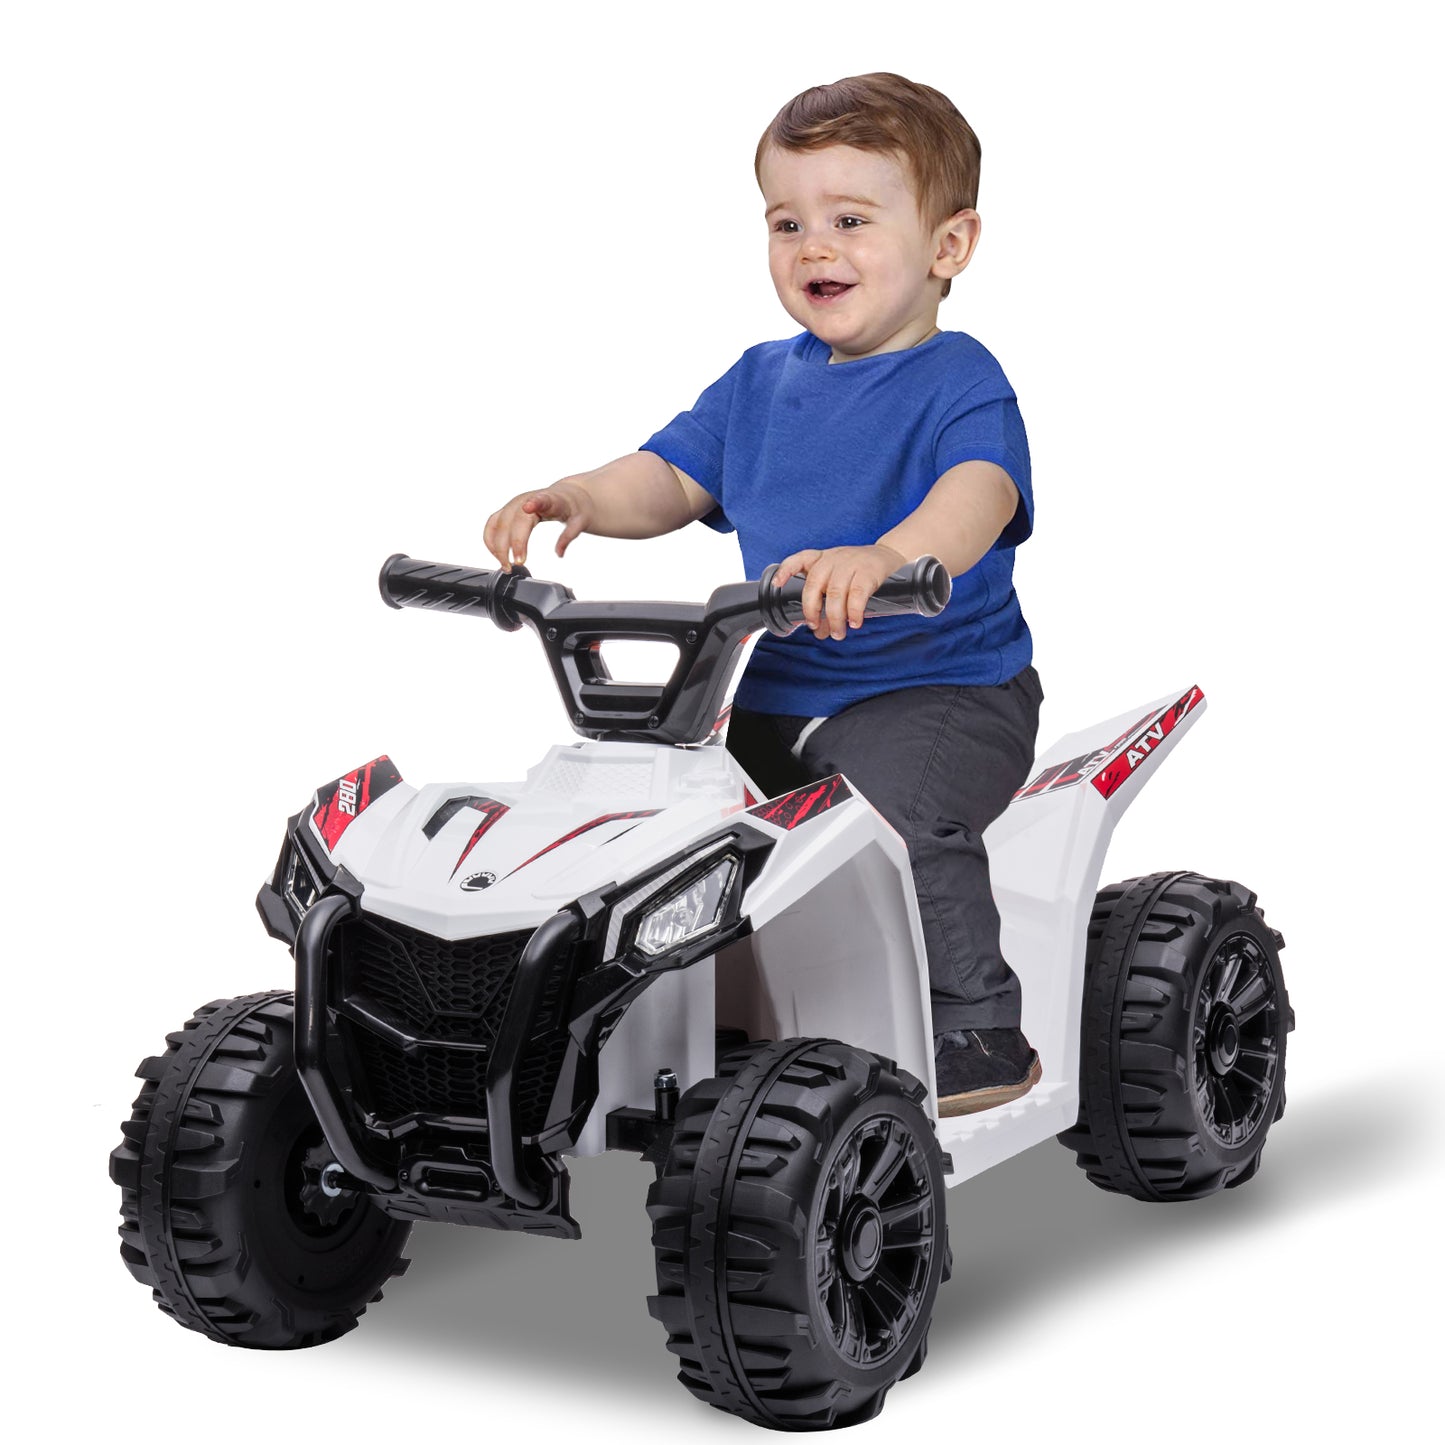 SYNGAR White Kids ATV, 6V Ride on Car with One-button Start and Rechargeable Battery, Electric Ride on Toy for 1.5-2.5 years Boy Girls